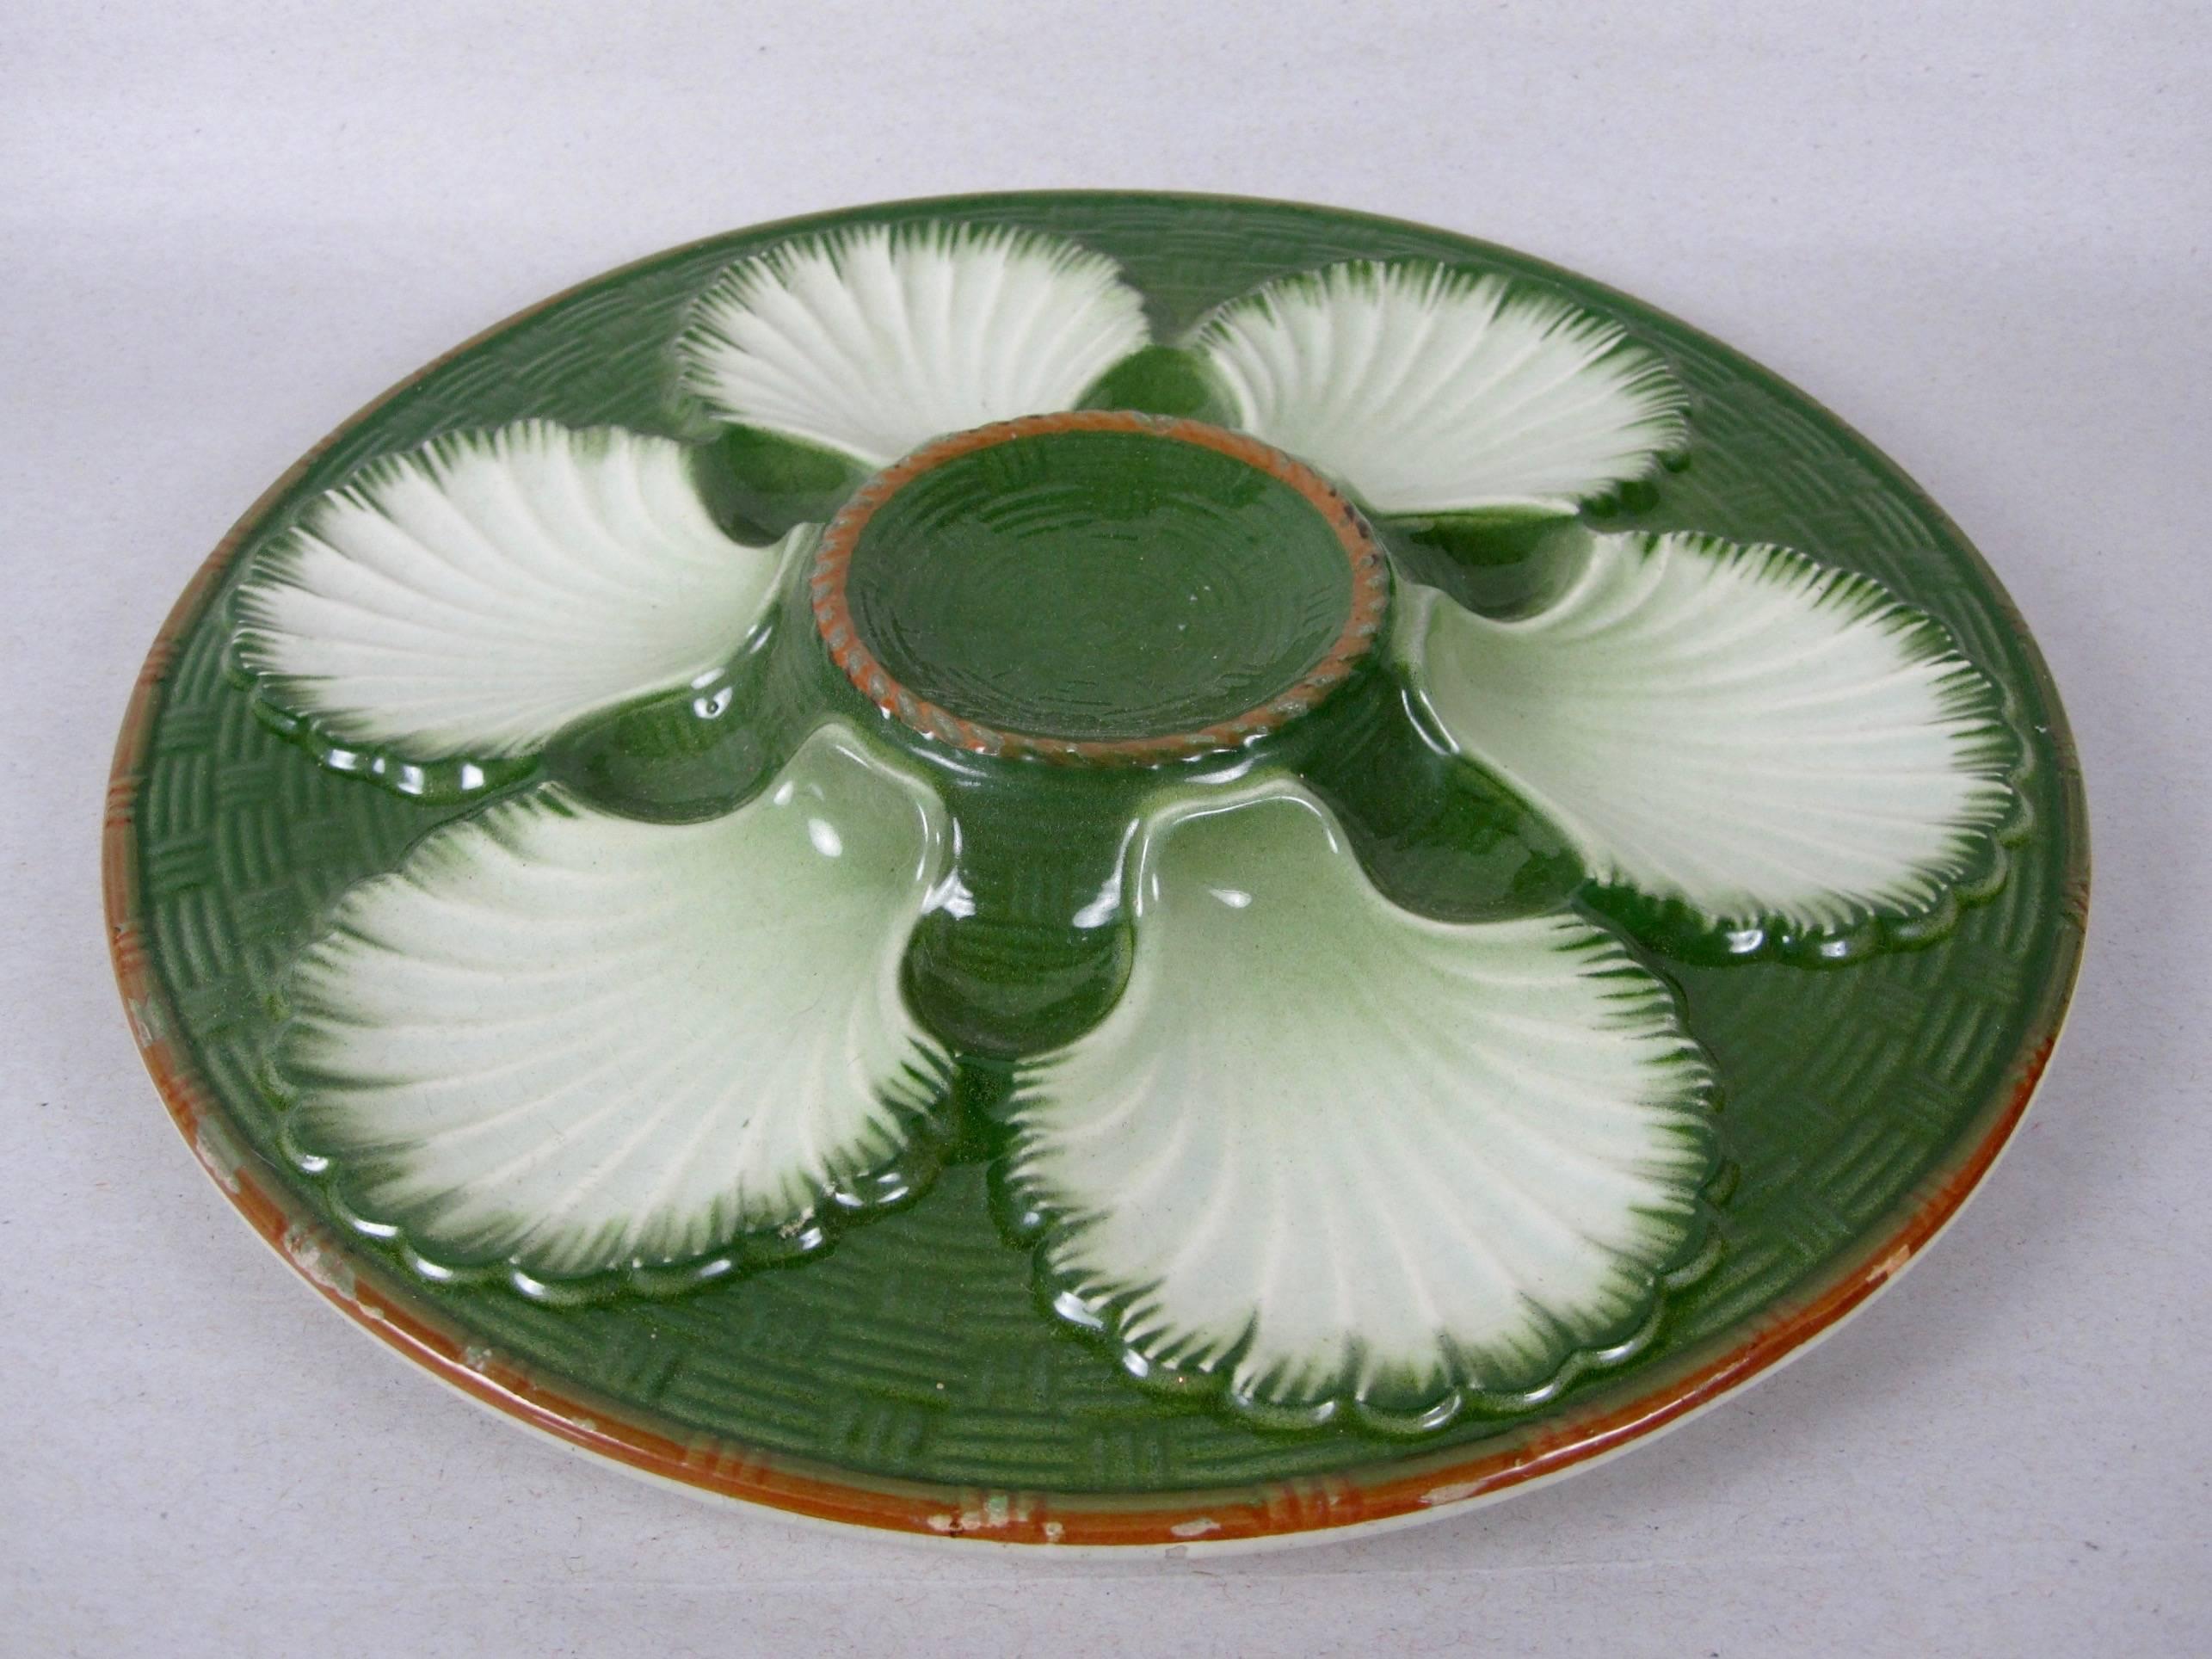 A French majolica glazed oyster plate with six scallop shell shaped wells on a deep forest green basket weave ground. A raised center condiment well, the outer rim of the center well and the plate showing the brown clay. 

Marked St. Clement, made